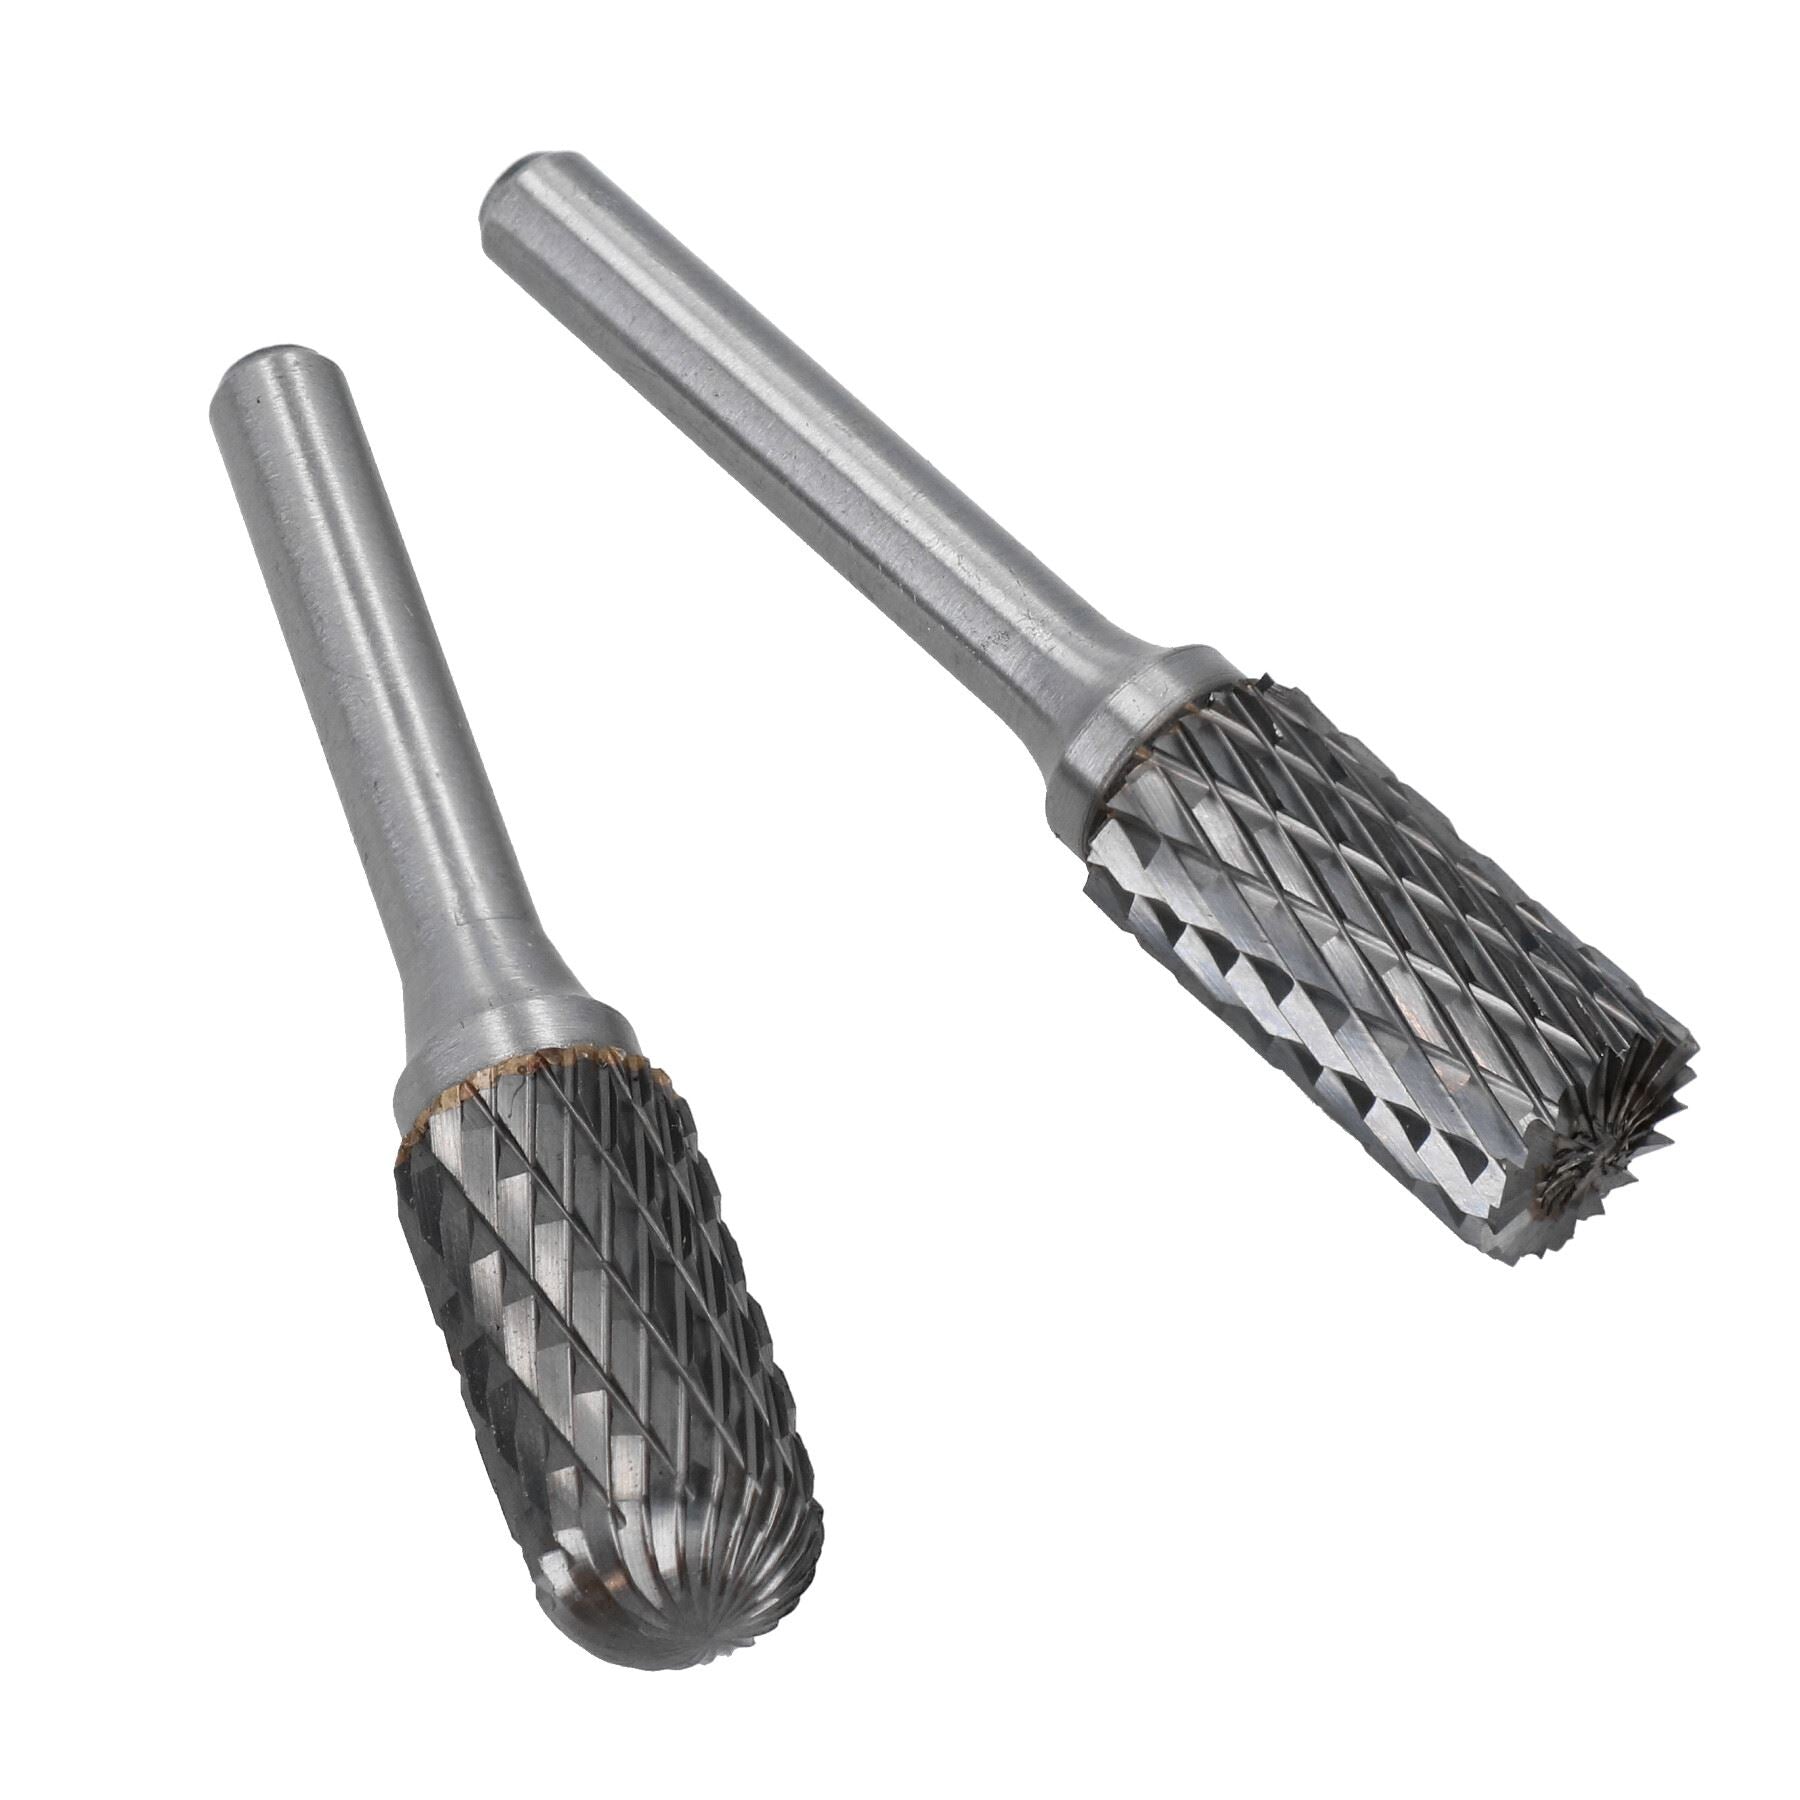 2pc Professional Tungsten Carbide Burr Rotary Files for Polishing Porting